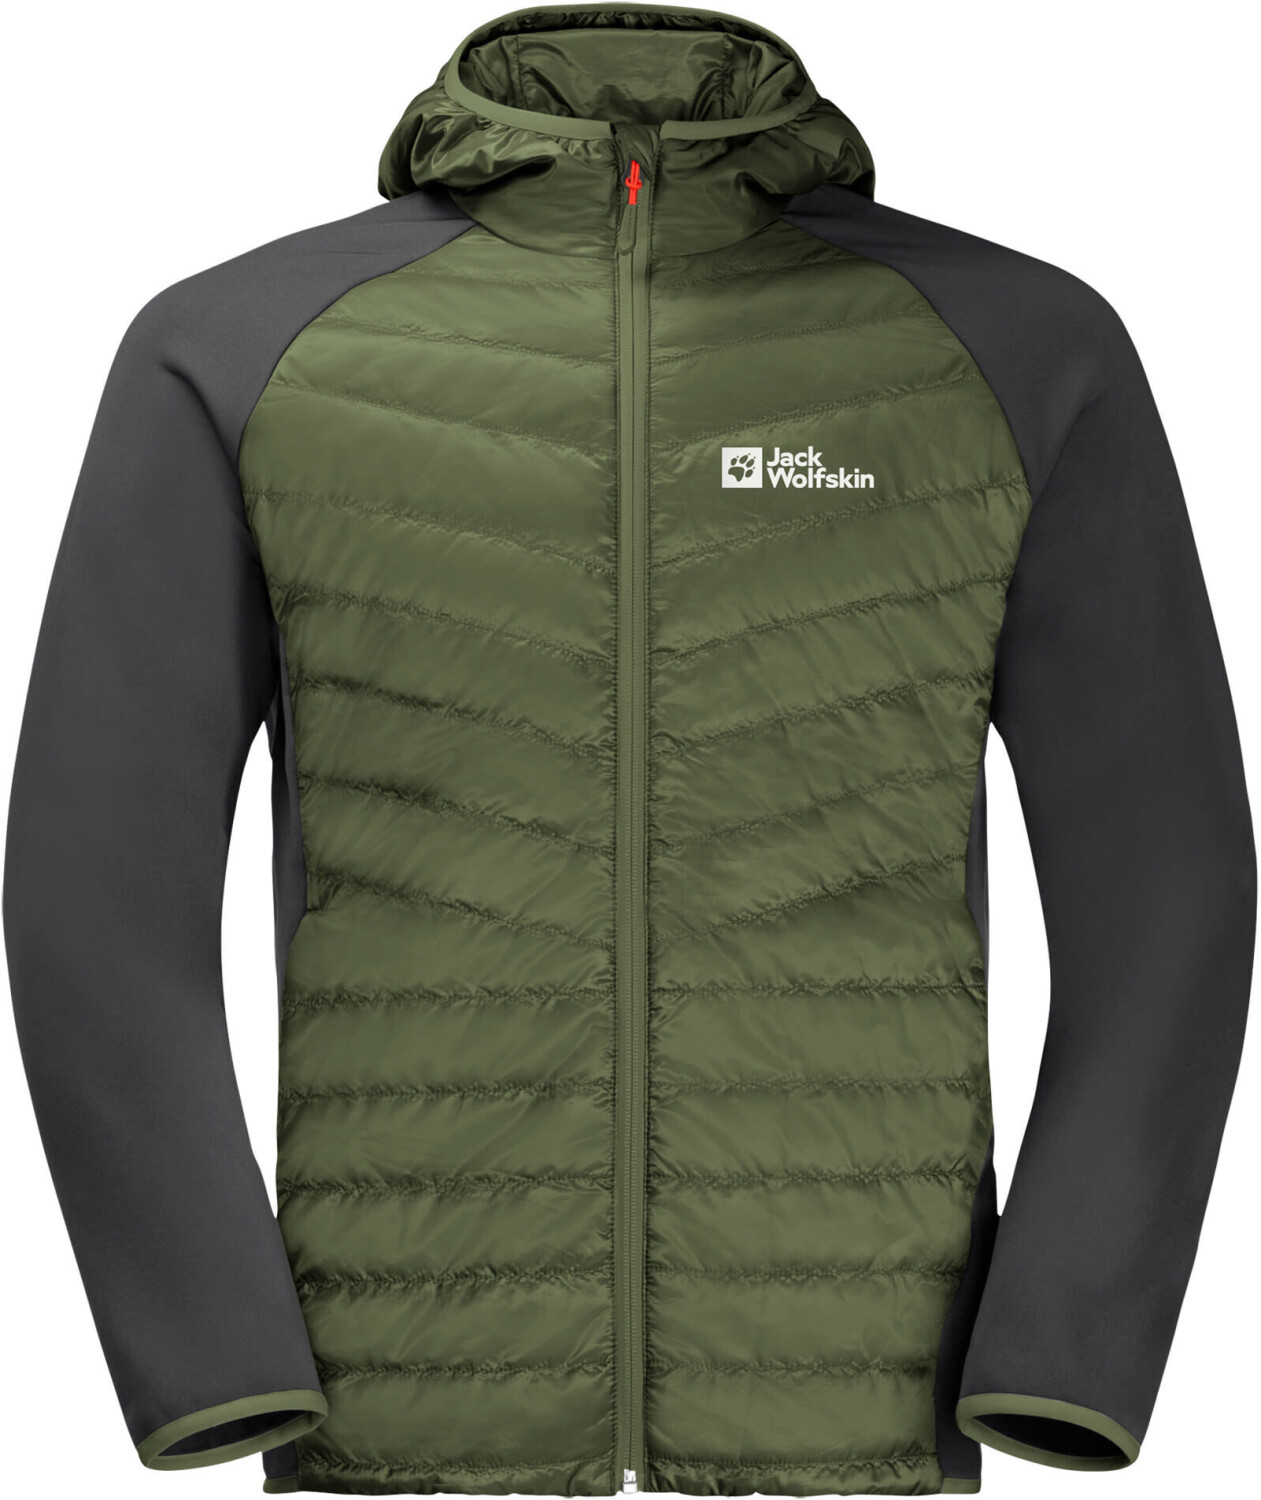 Buy Jack Wolfskin Best on (Today) £60.00 Deals from Pro Hybrid Routeburn – M